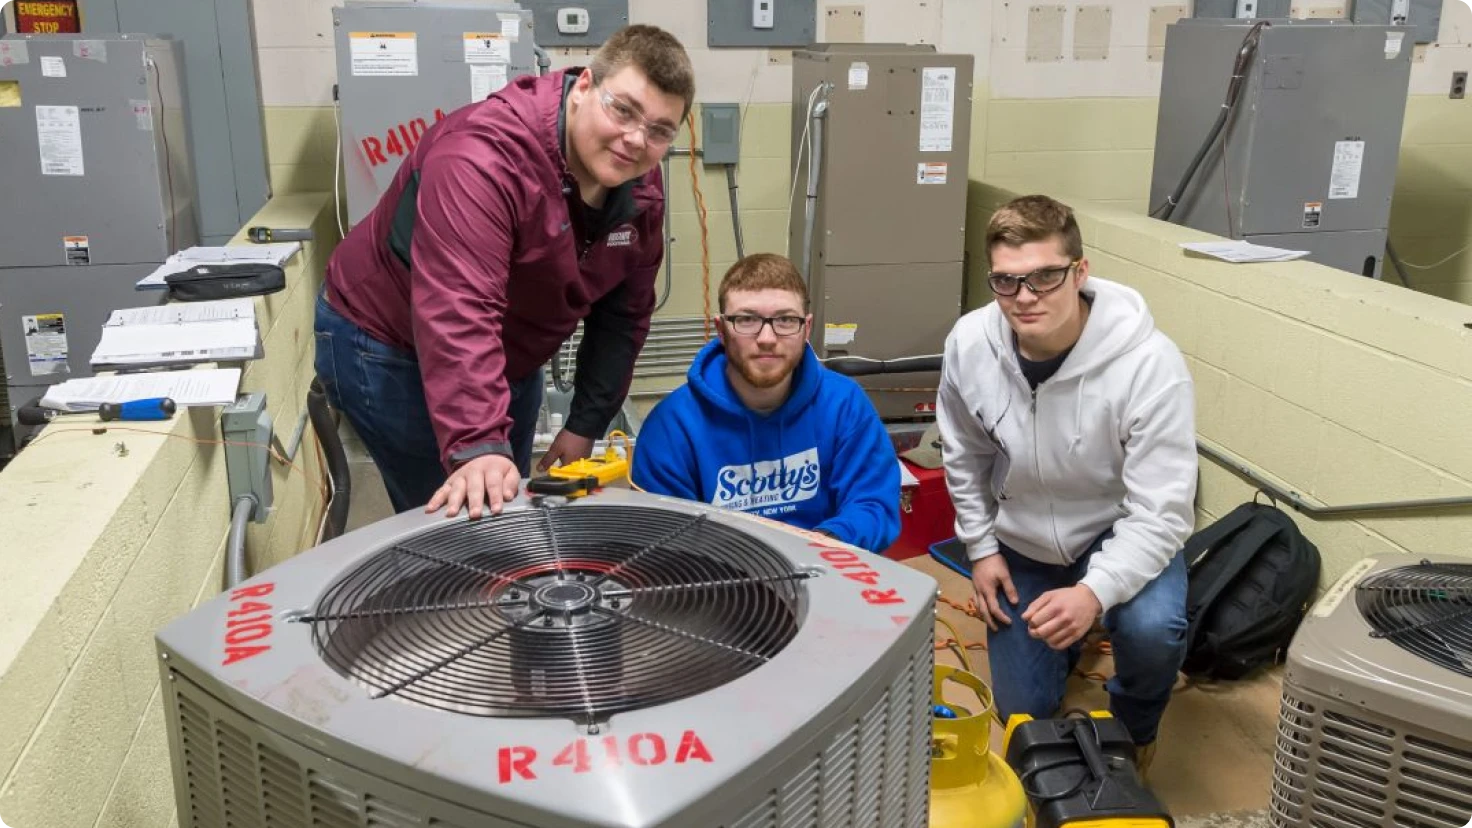 Pennsylvania College Of Technology In Williamsport Hvac Students